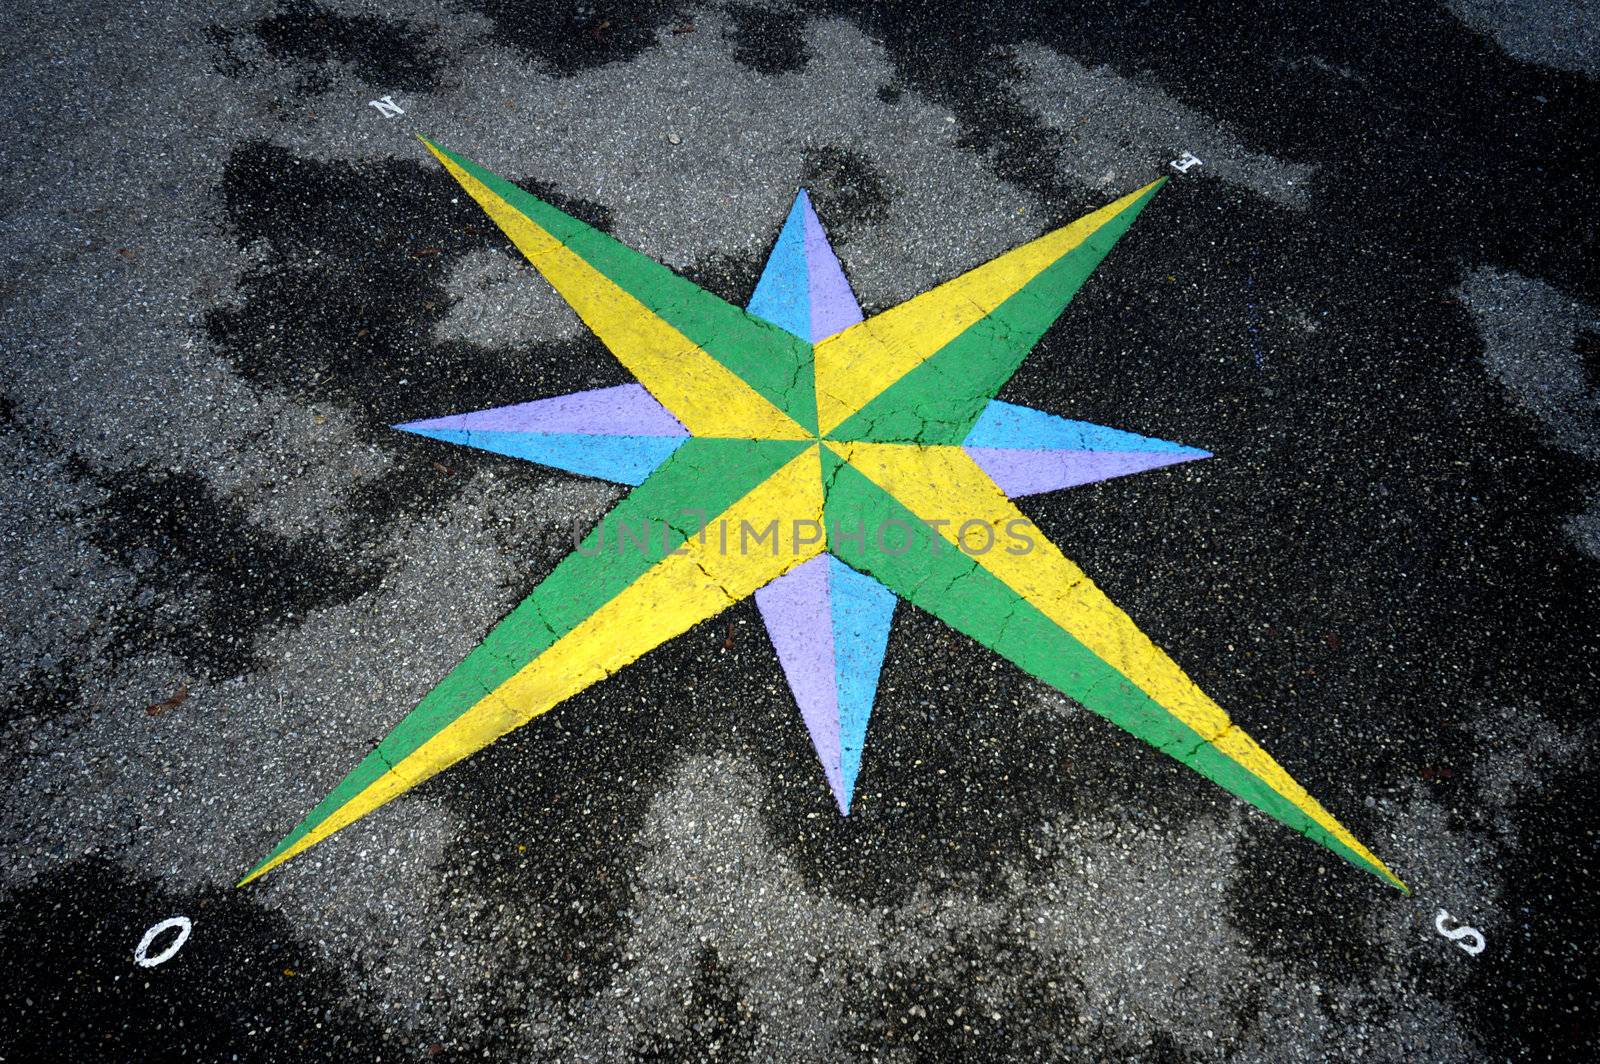 A colourful compass rose set into asphalt, which is slightly wet. Photoraph taken in a French-speaking country, which is why west is signified by an 'O' (ouest). 